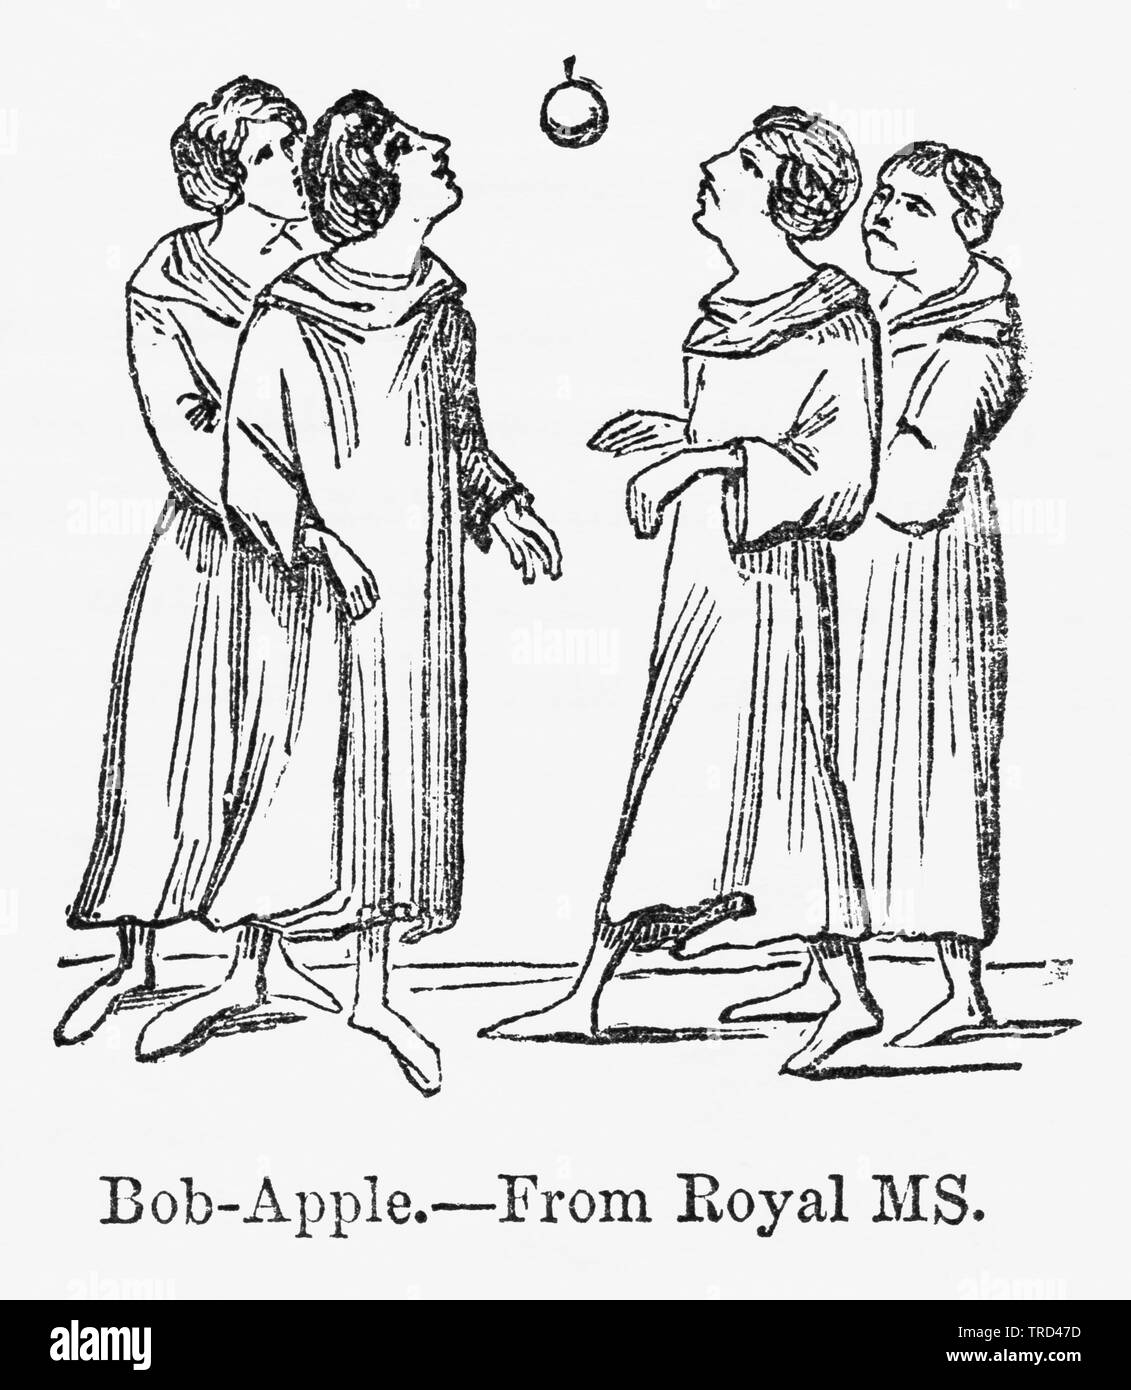 Bob-Apple, from Royal MS, Small Group of Men Bobbing for an Apple, Illustration from John Cassell's Illustrated History of England, Vol. I from the earliest period to the reign of Edward the Fourth, Cassell, Petter and Galpin, 1857 Stock Photo